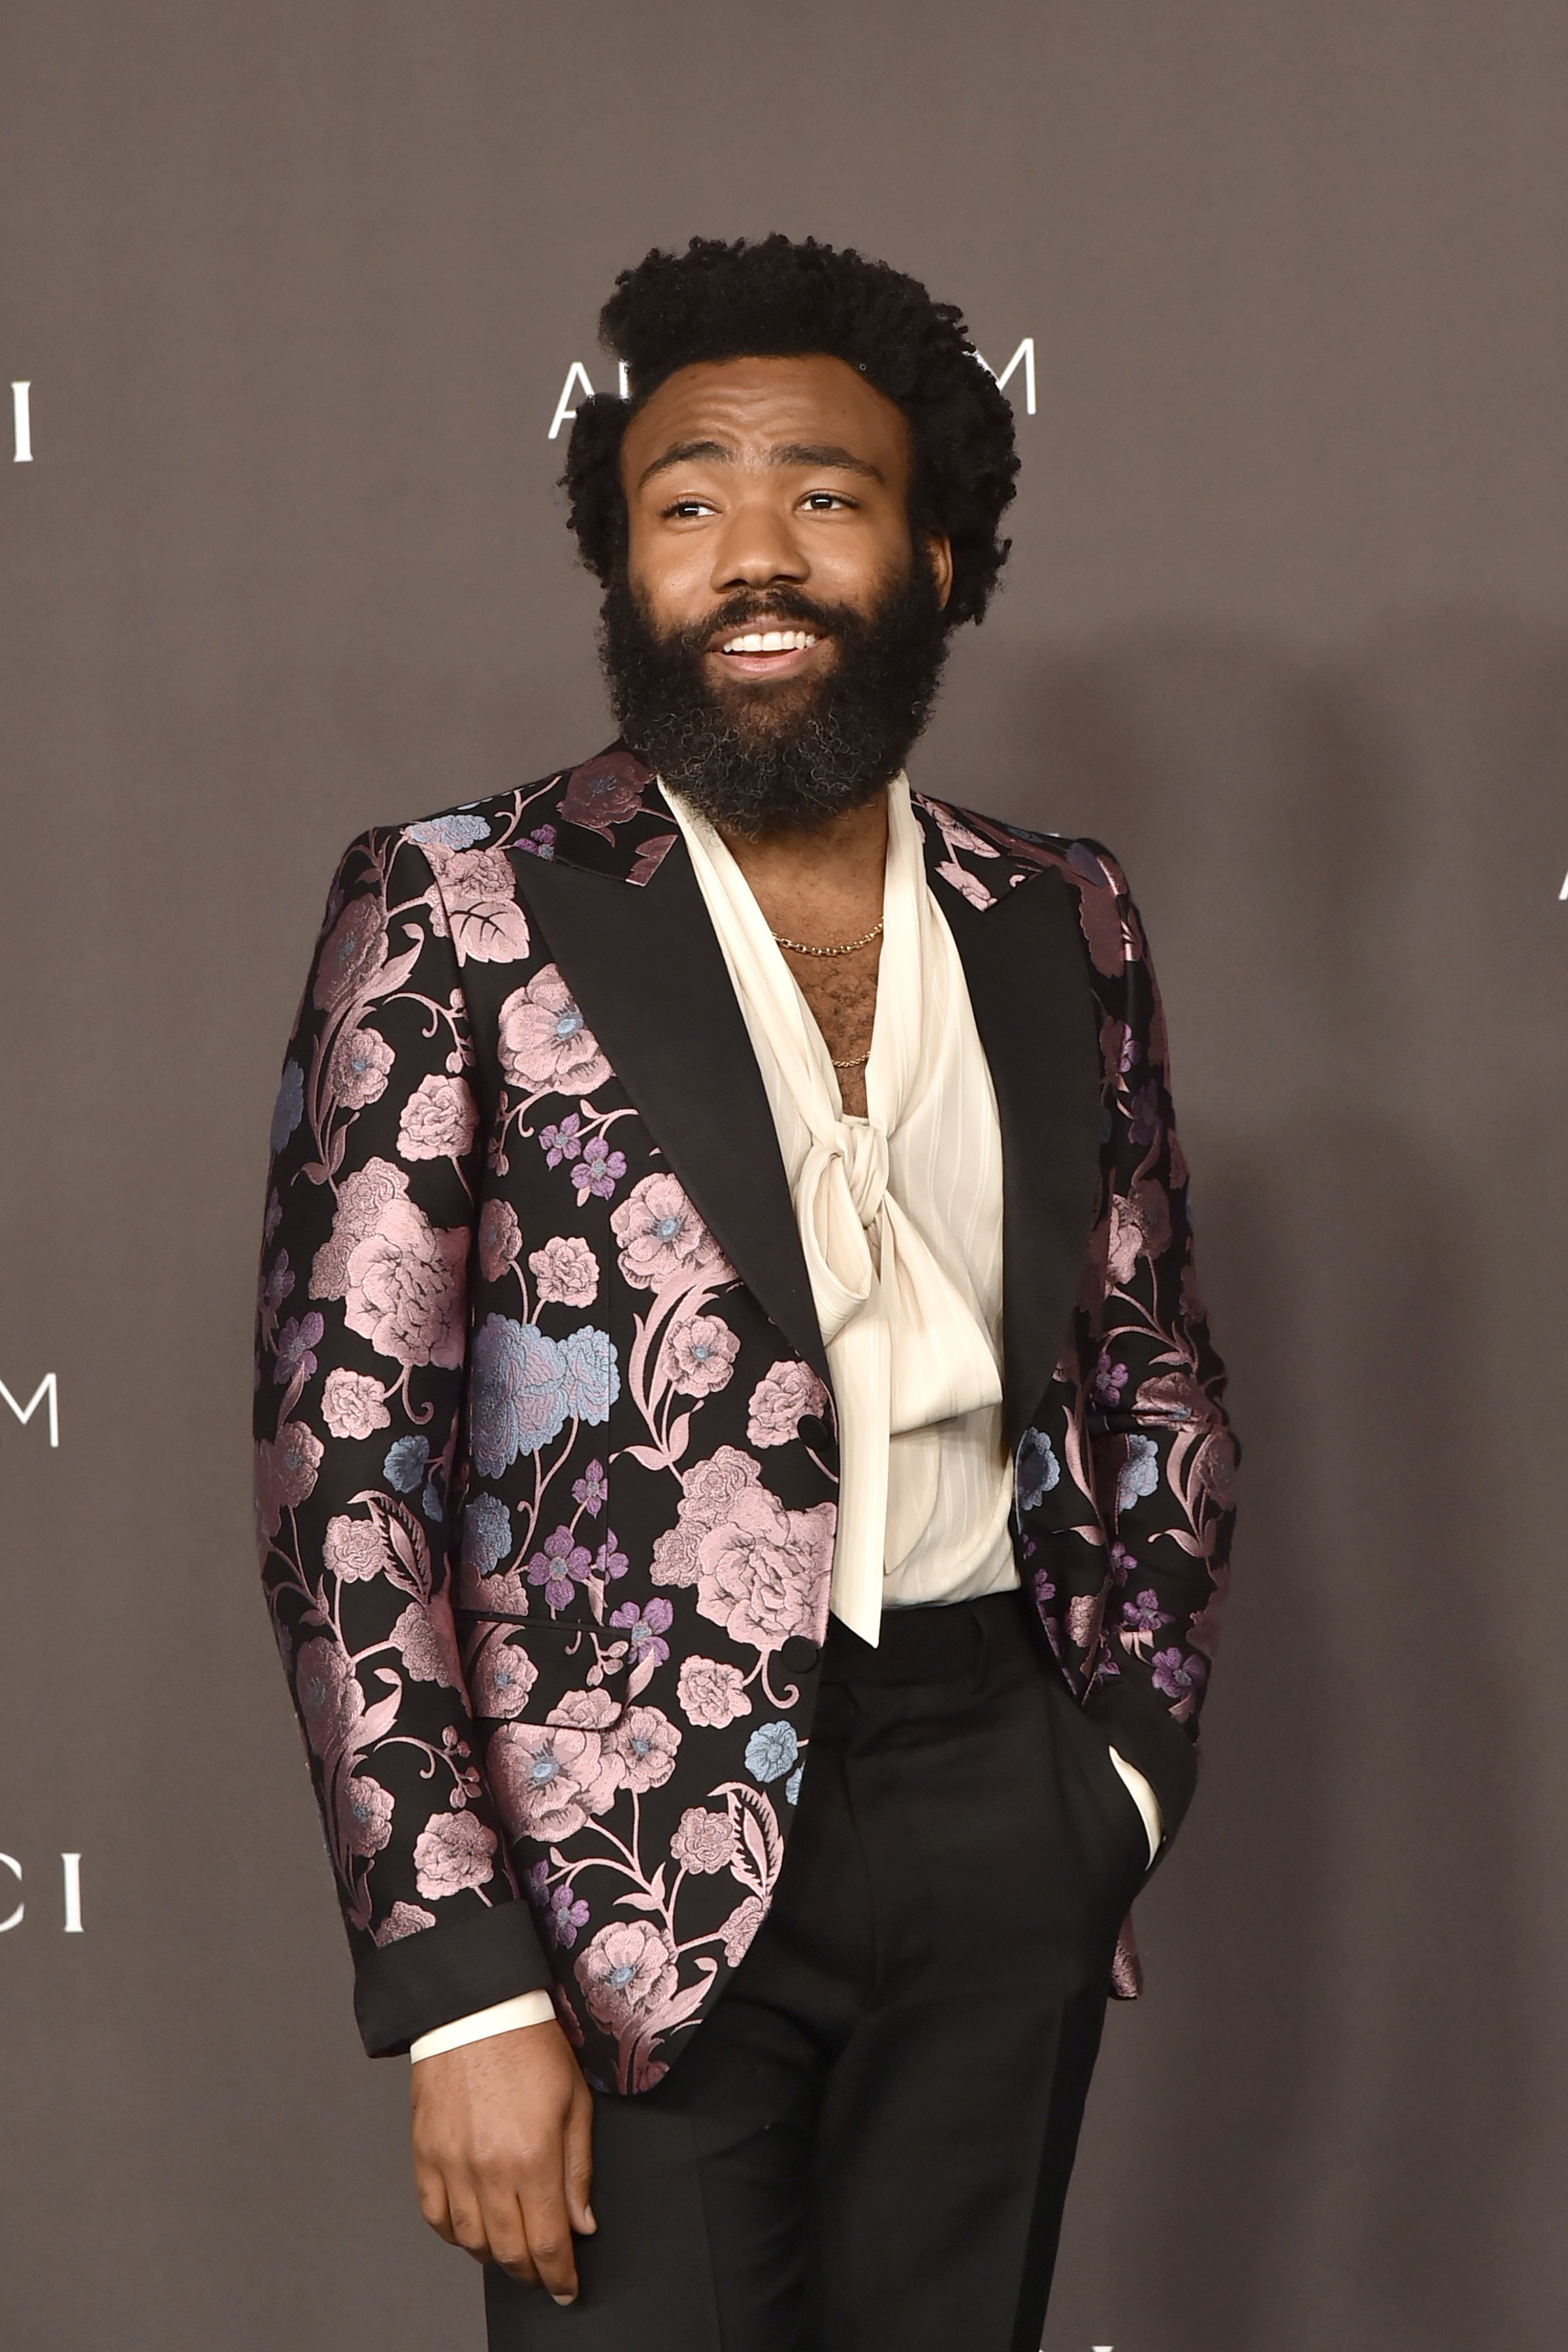 Donald Glover at LACMA on November 2, 2019 in Los Angeles, California.  Source: Getty Images